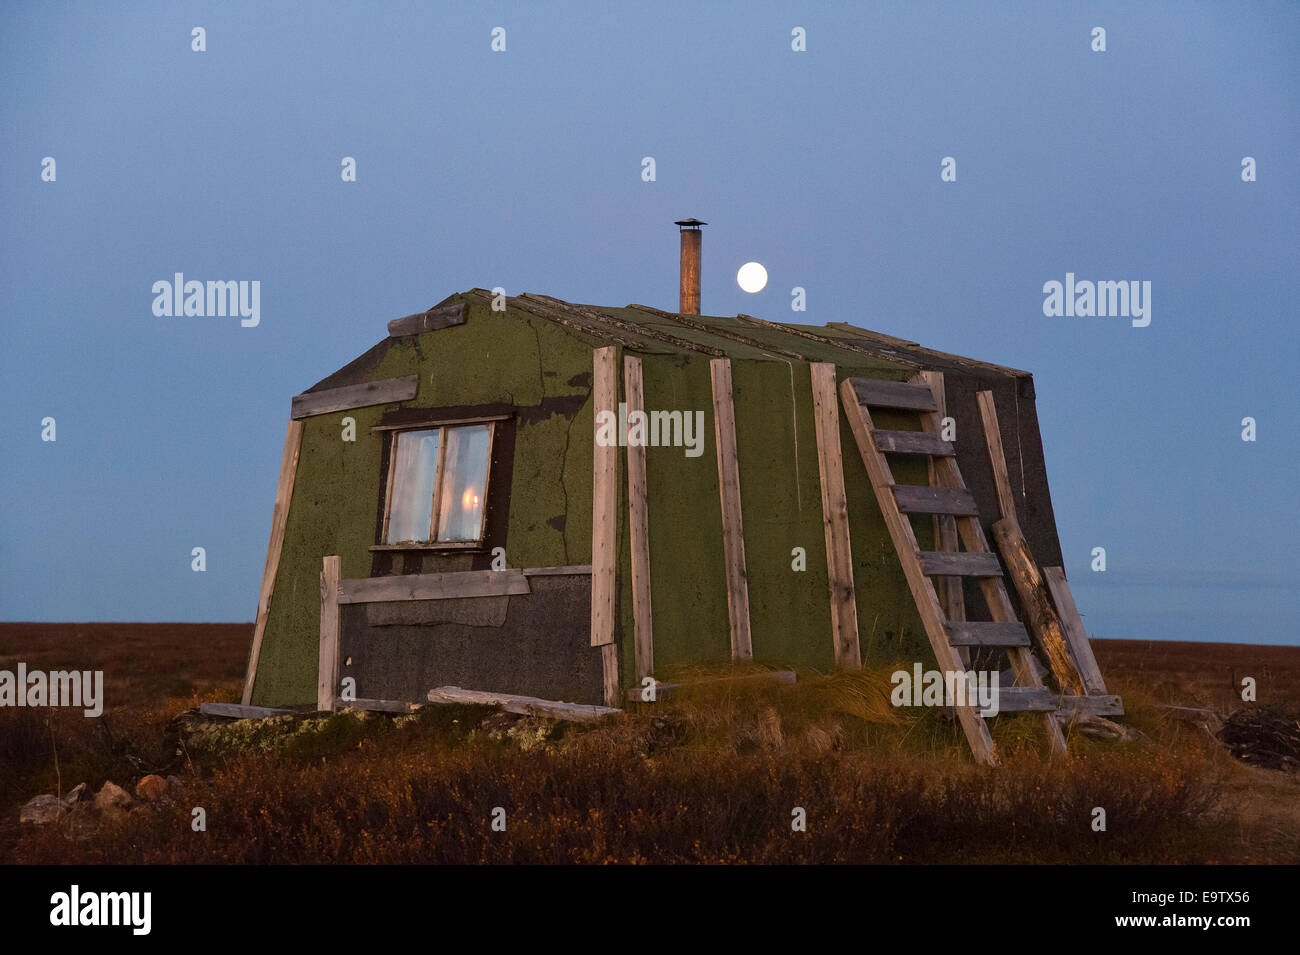 Moon and open wilderness hut Stock Photo